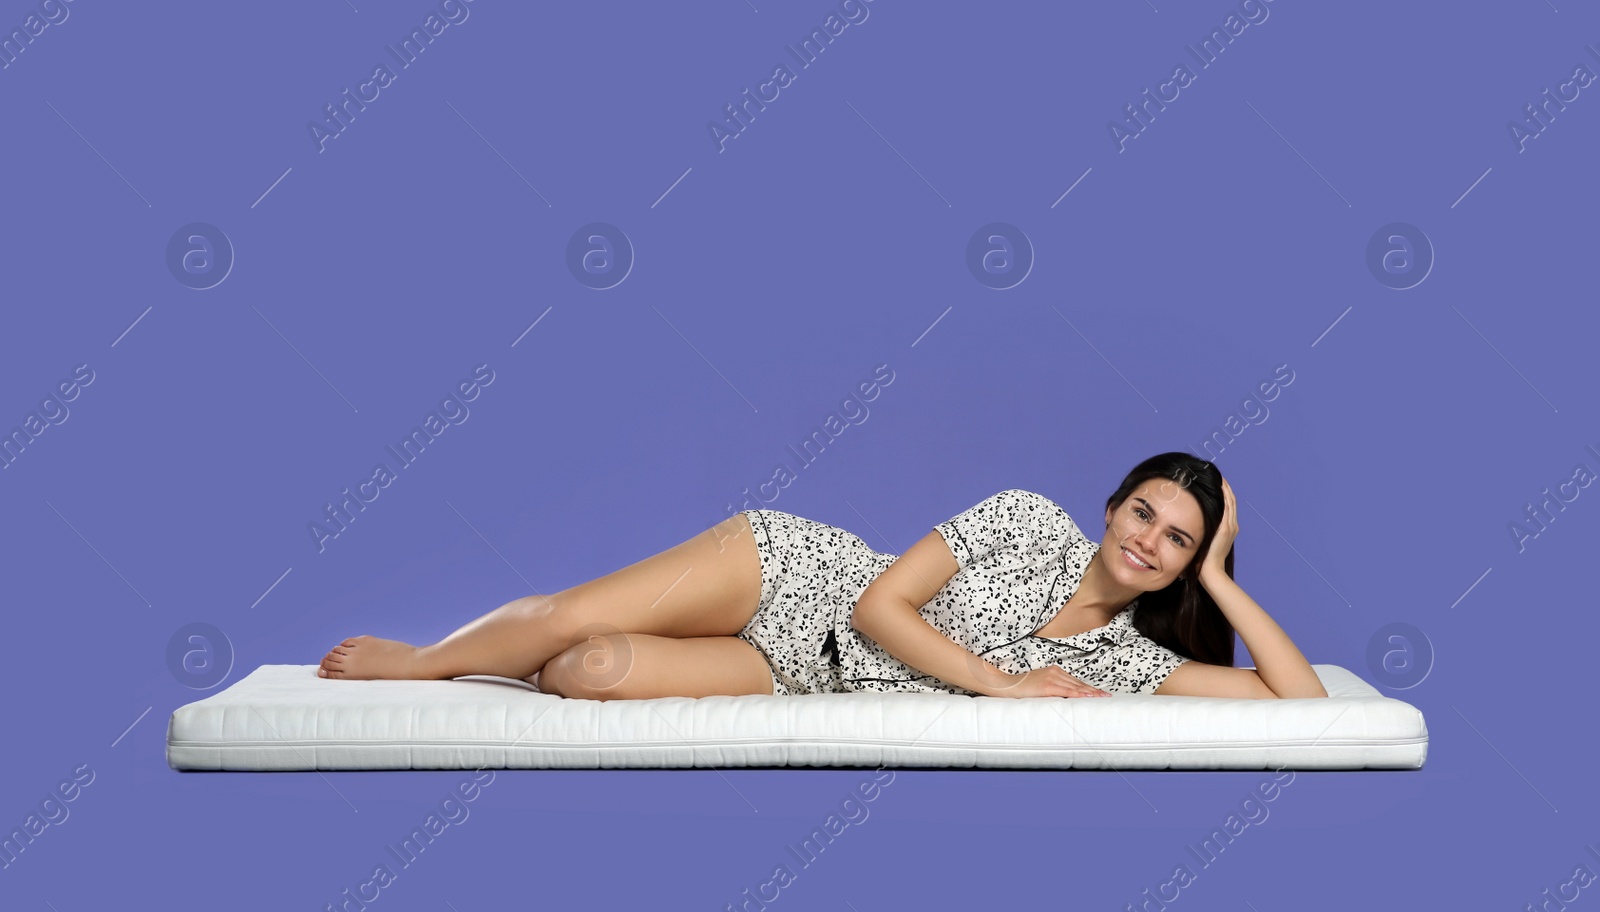 Photo of Young woman lying on soft mattress against light purple background